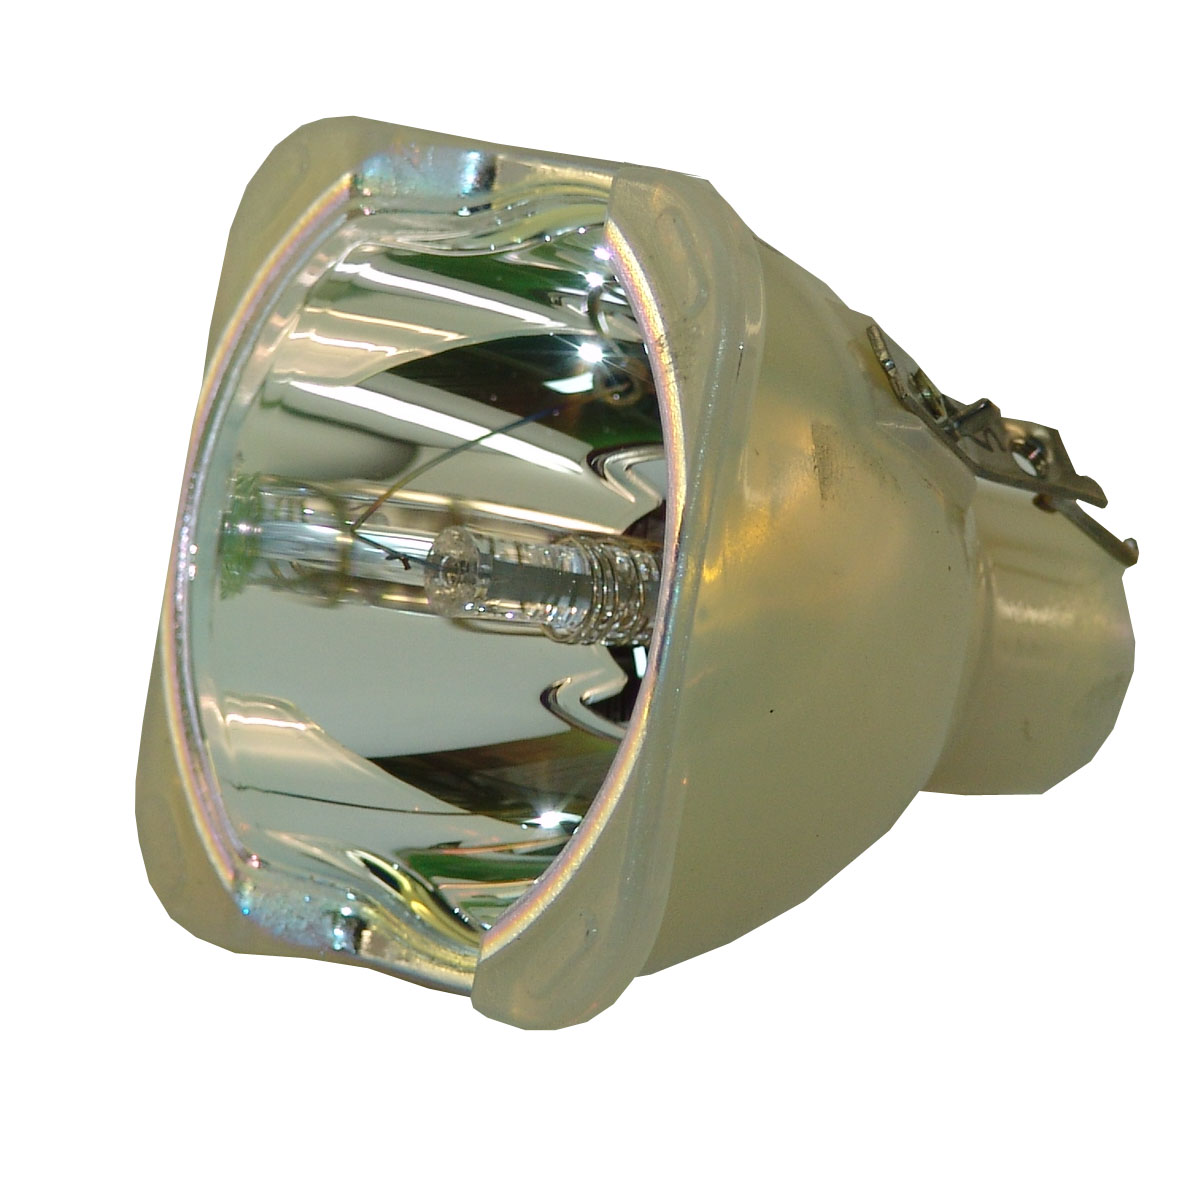 Original Philips Projector Lamp Replacement for BenQ 59.J9401.CG1 (Bulb Only) - image 1 of 6